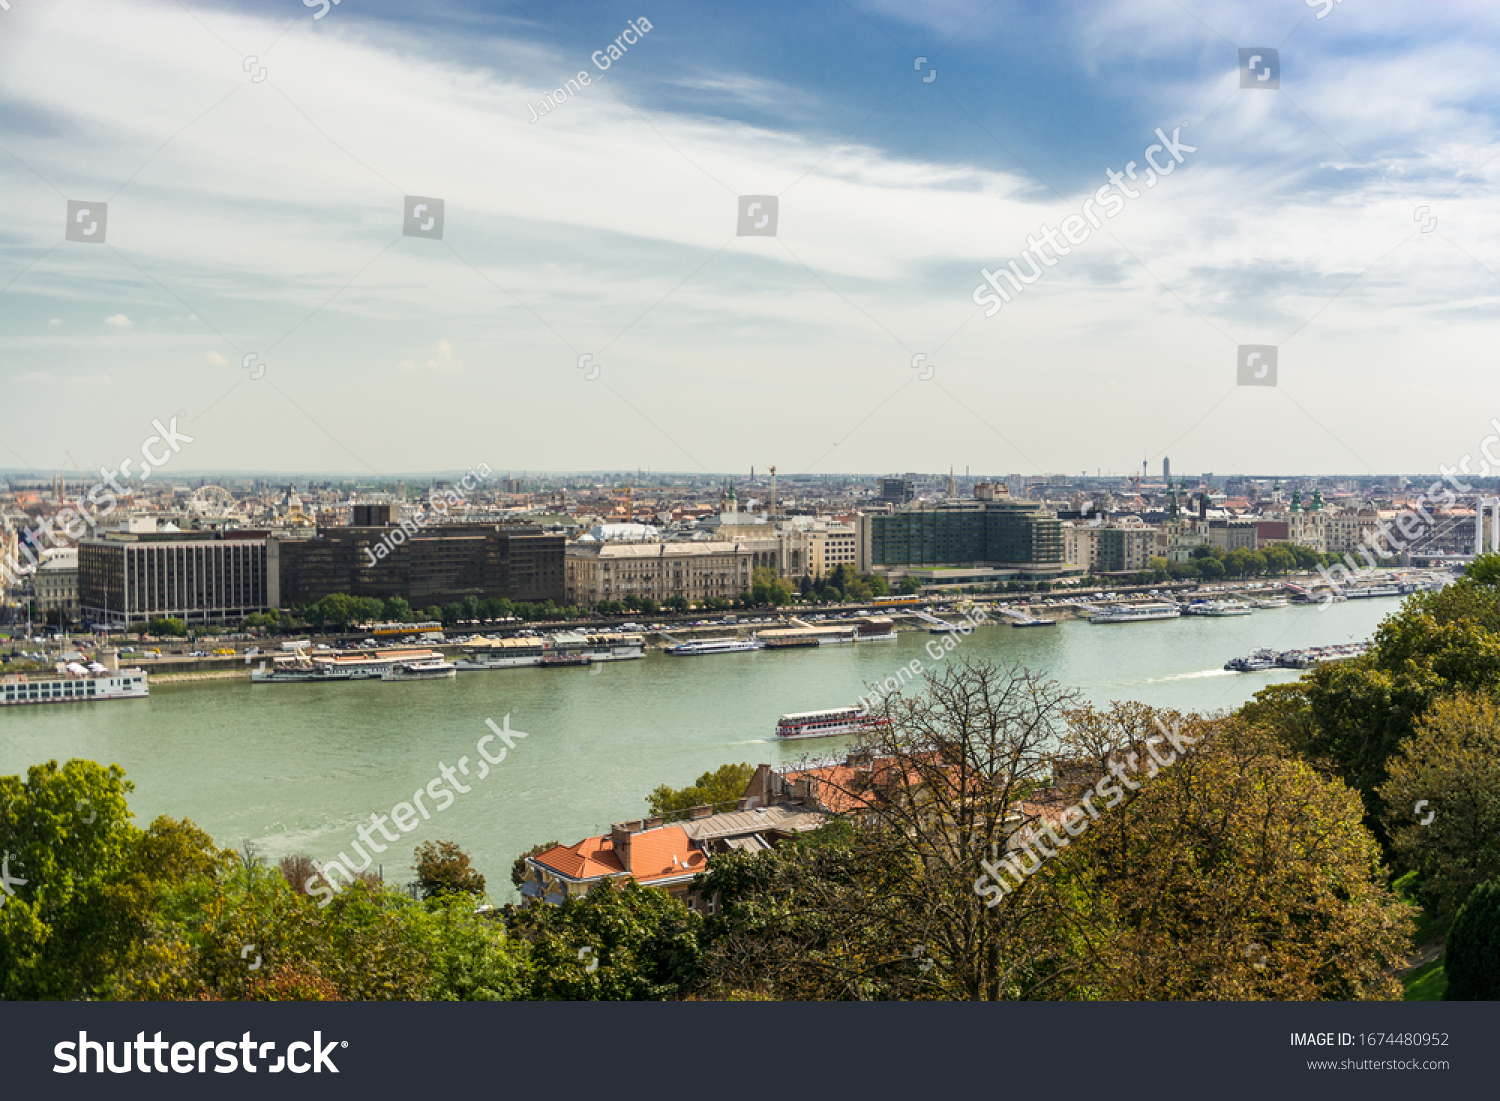 Budapest, Hungary, Europe - September 14, 2018: Views of Budapest and the Danube from the Buda Castle #1674480952